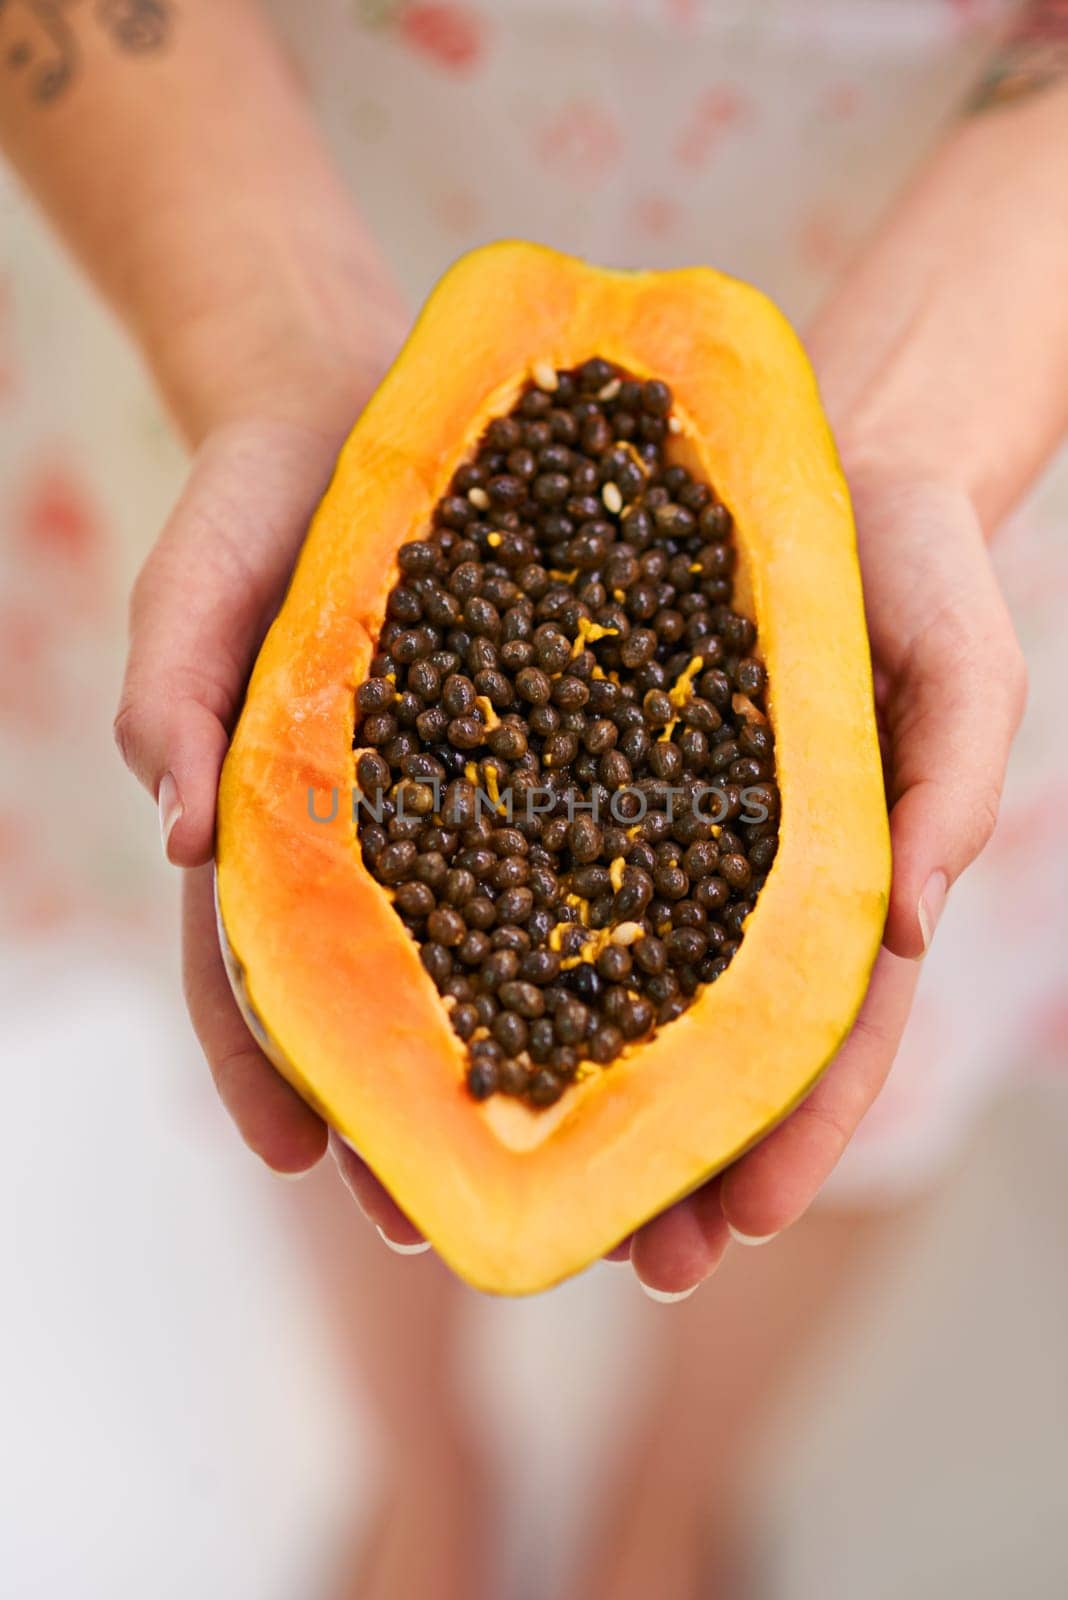 Fruit, papaya and hands in half with seeds for nutrition for healthy eating, nutrients and wellness. Above, pawpaw and diet with snack for weight loss with vitamin c for freshness with balance by YuriArcurs